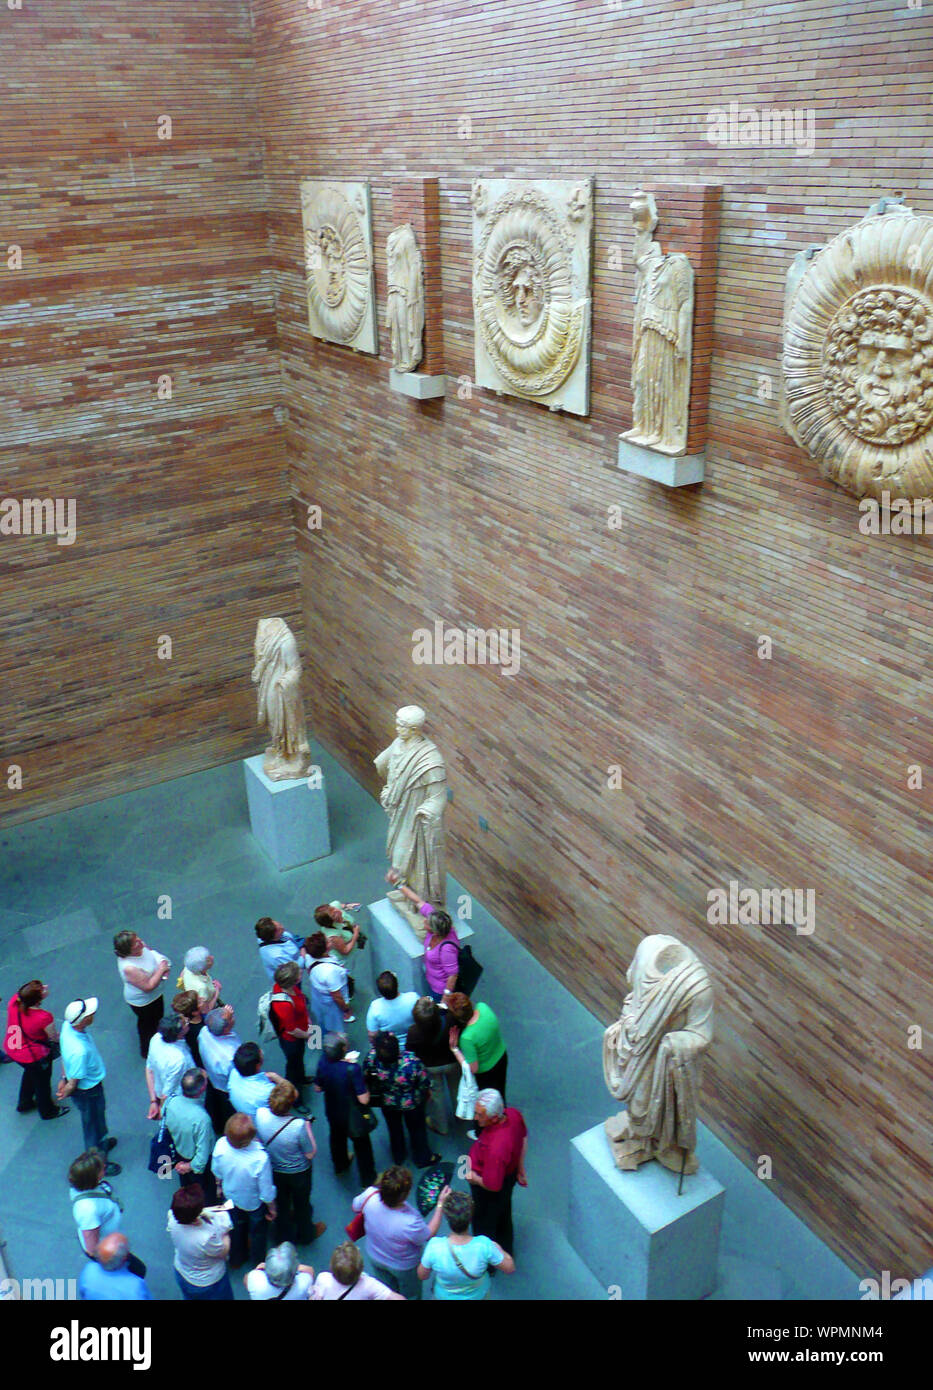 National Museum of Roman Art, Merida, Spain (2009 photograph). A group of visitors study a sculpture Stock Photo